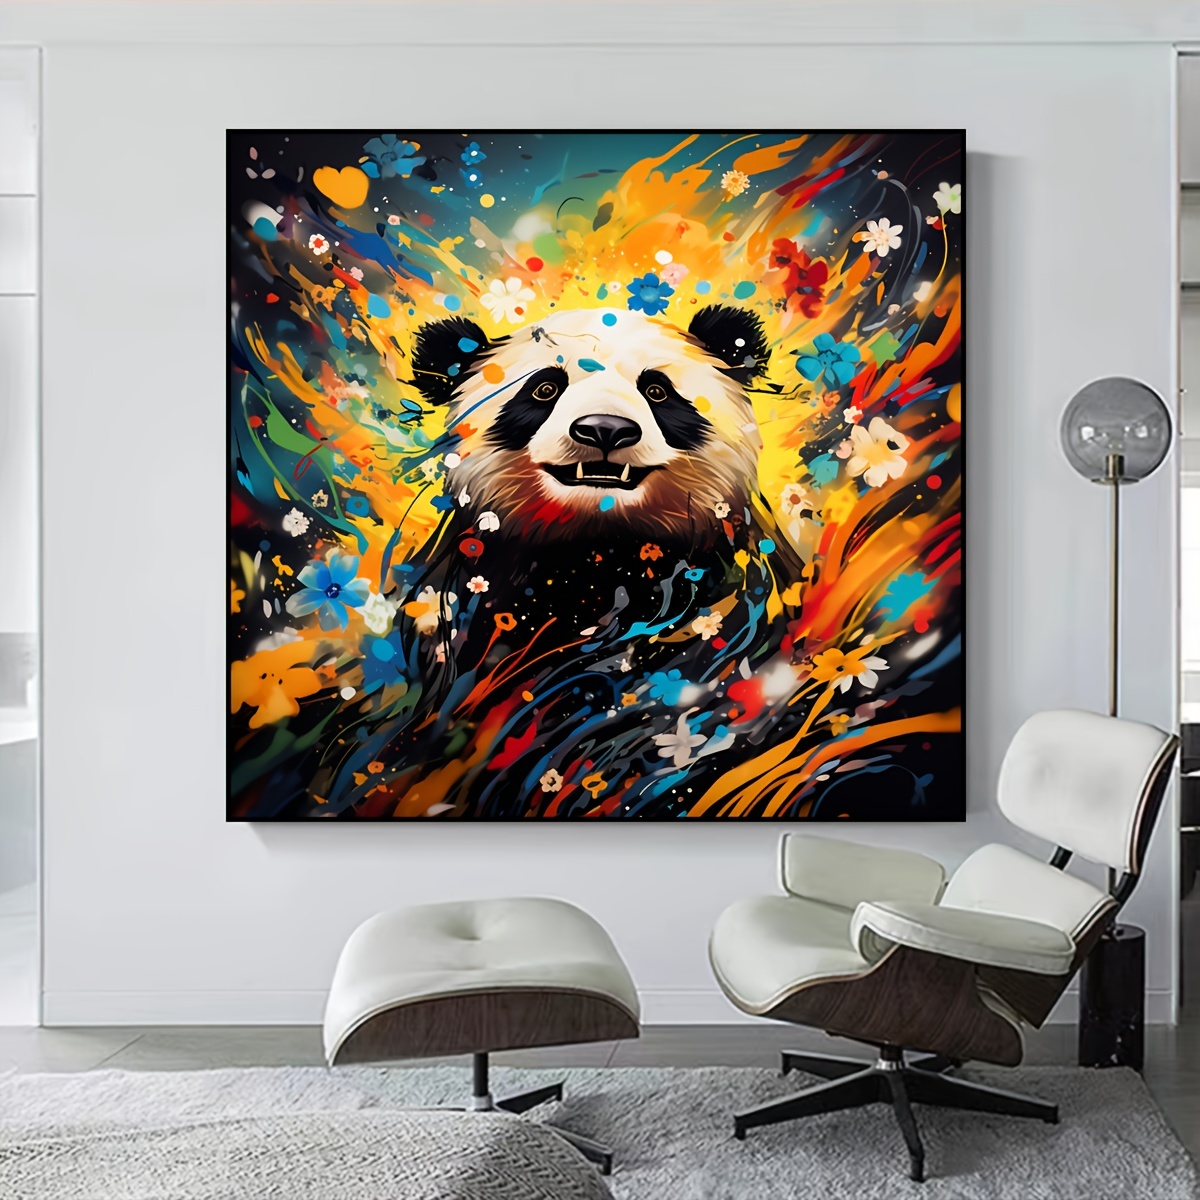 Panda 5D Diamond Painting Kits for Adults Beginners - Full Drill Round  Diamond Dot Art for Adults Animals Paintings with Diamonds for Kids  Rhinestones